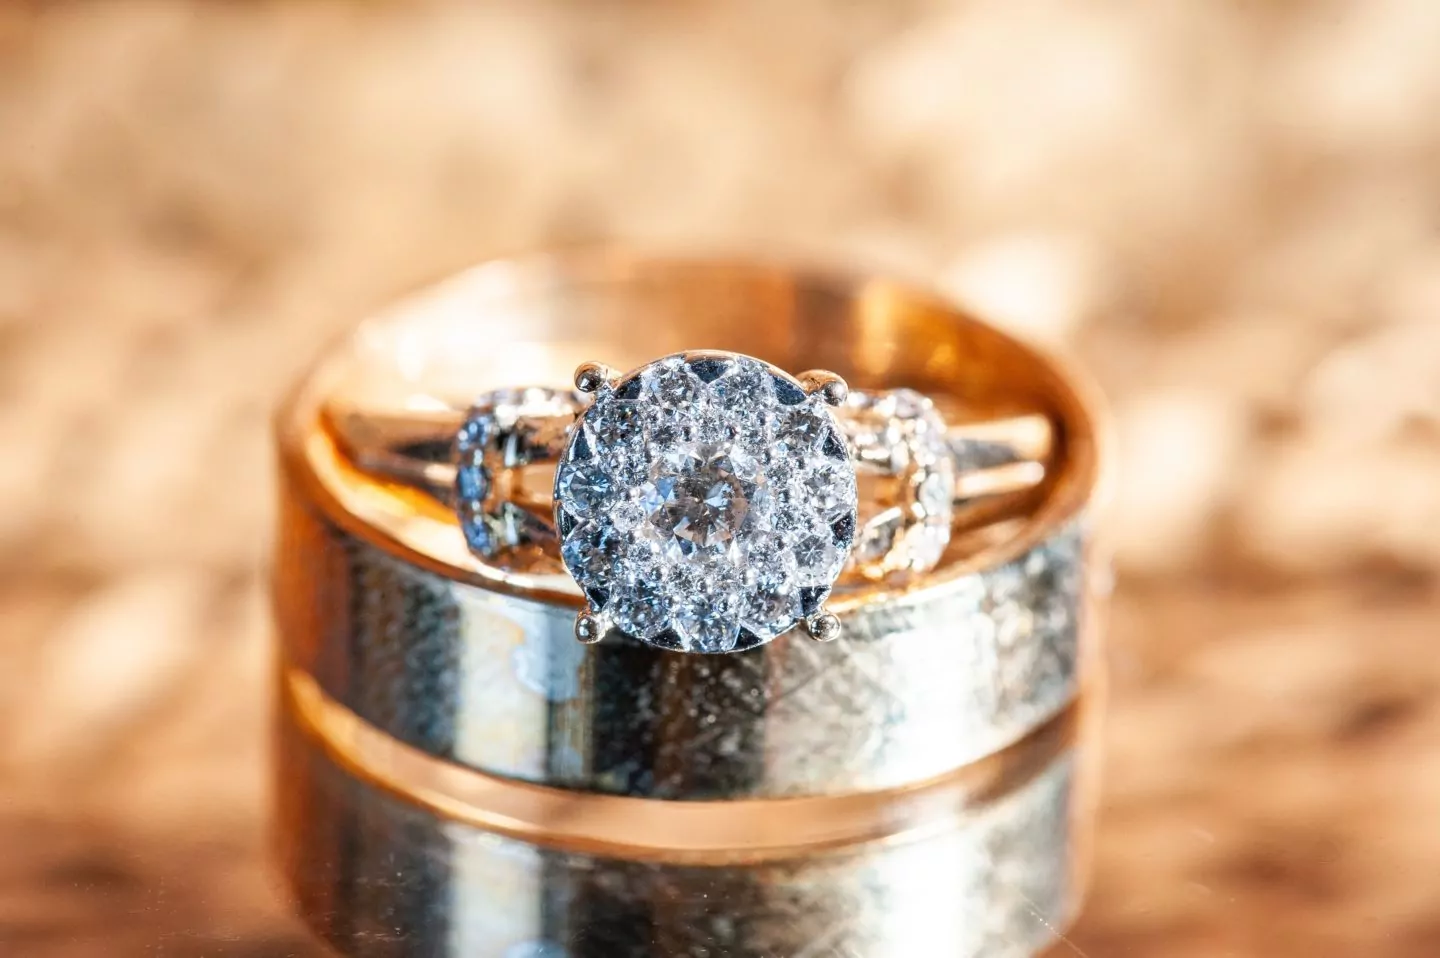 Closeup shot of a bridal ring set with a blurry background